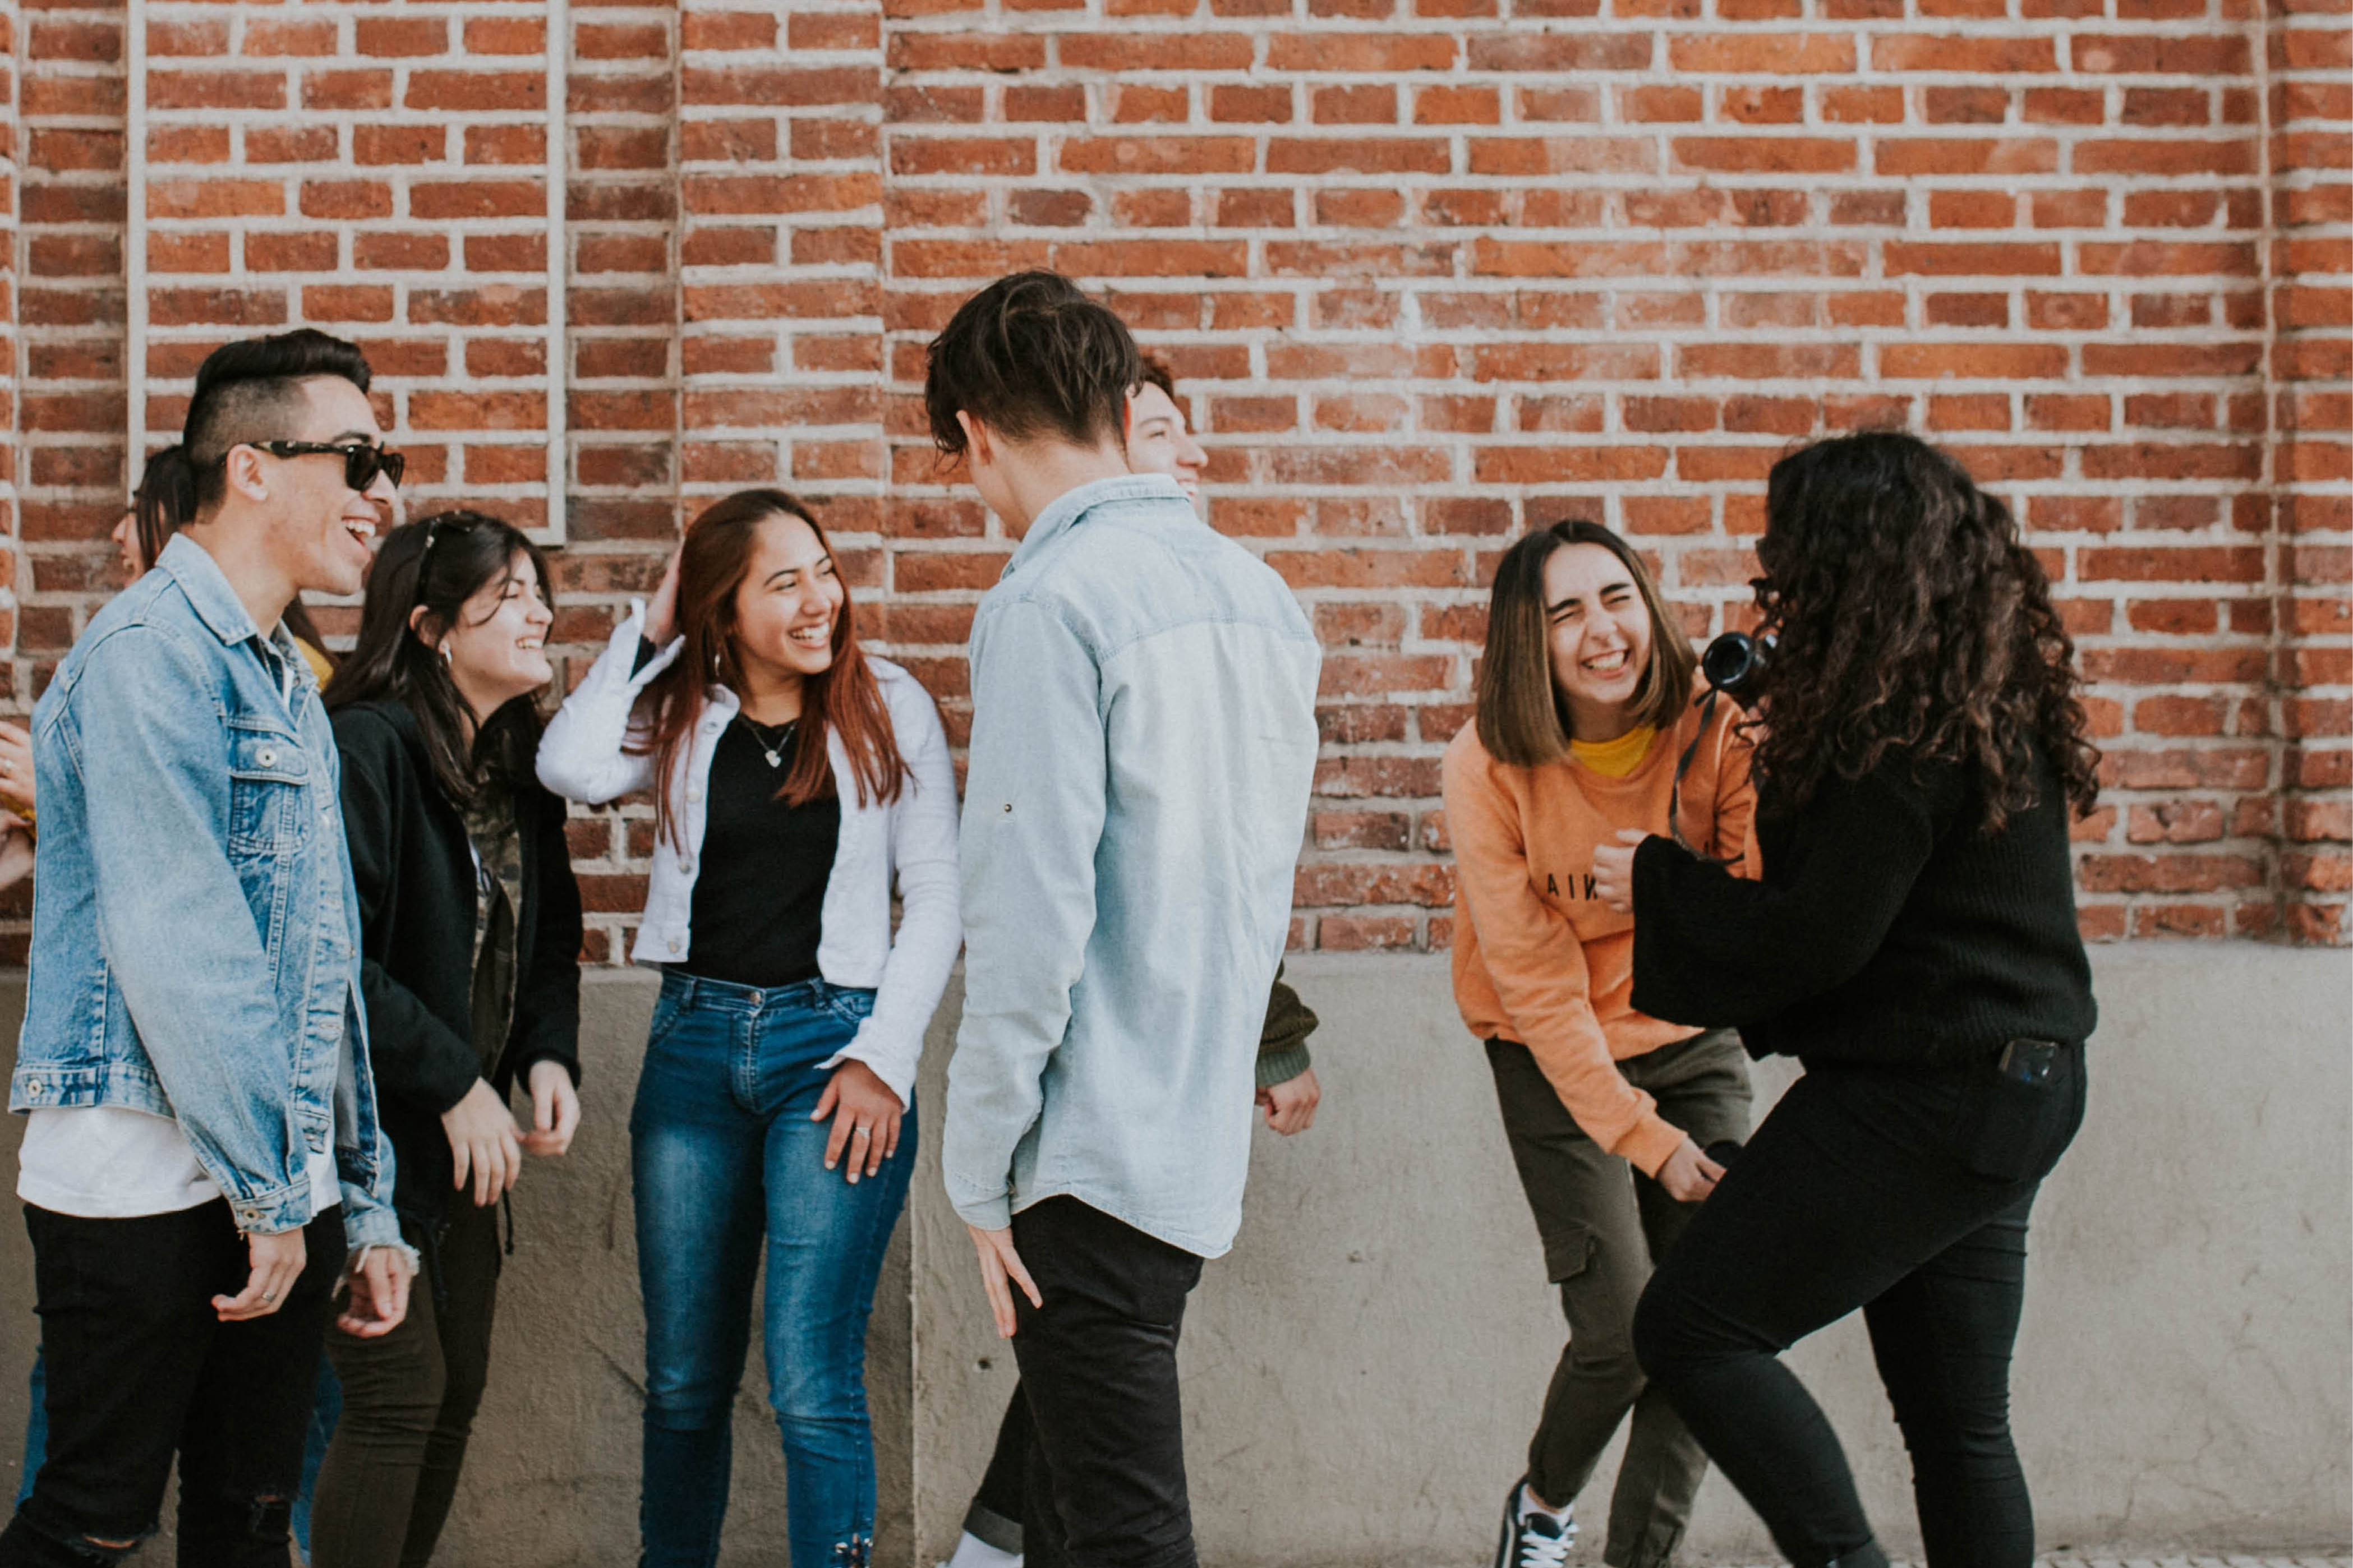 Group of teenagers laughing together outside of a brick building